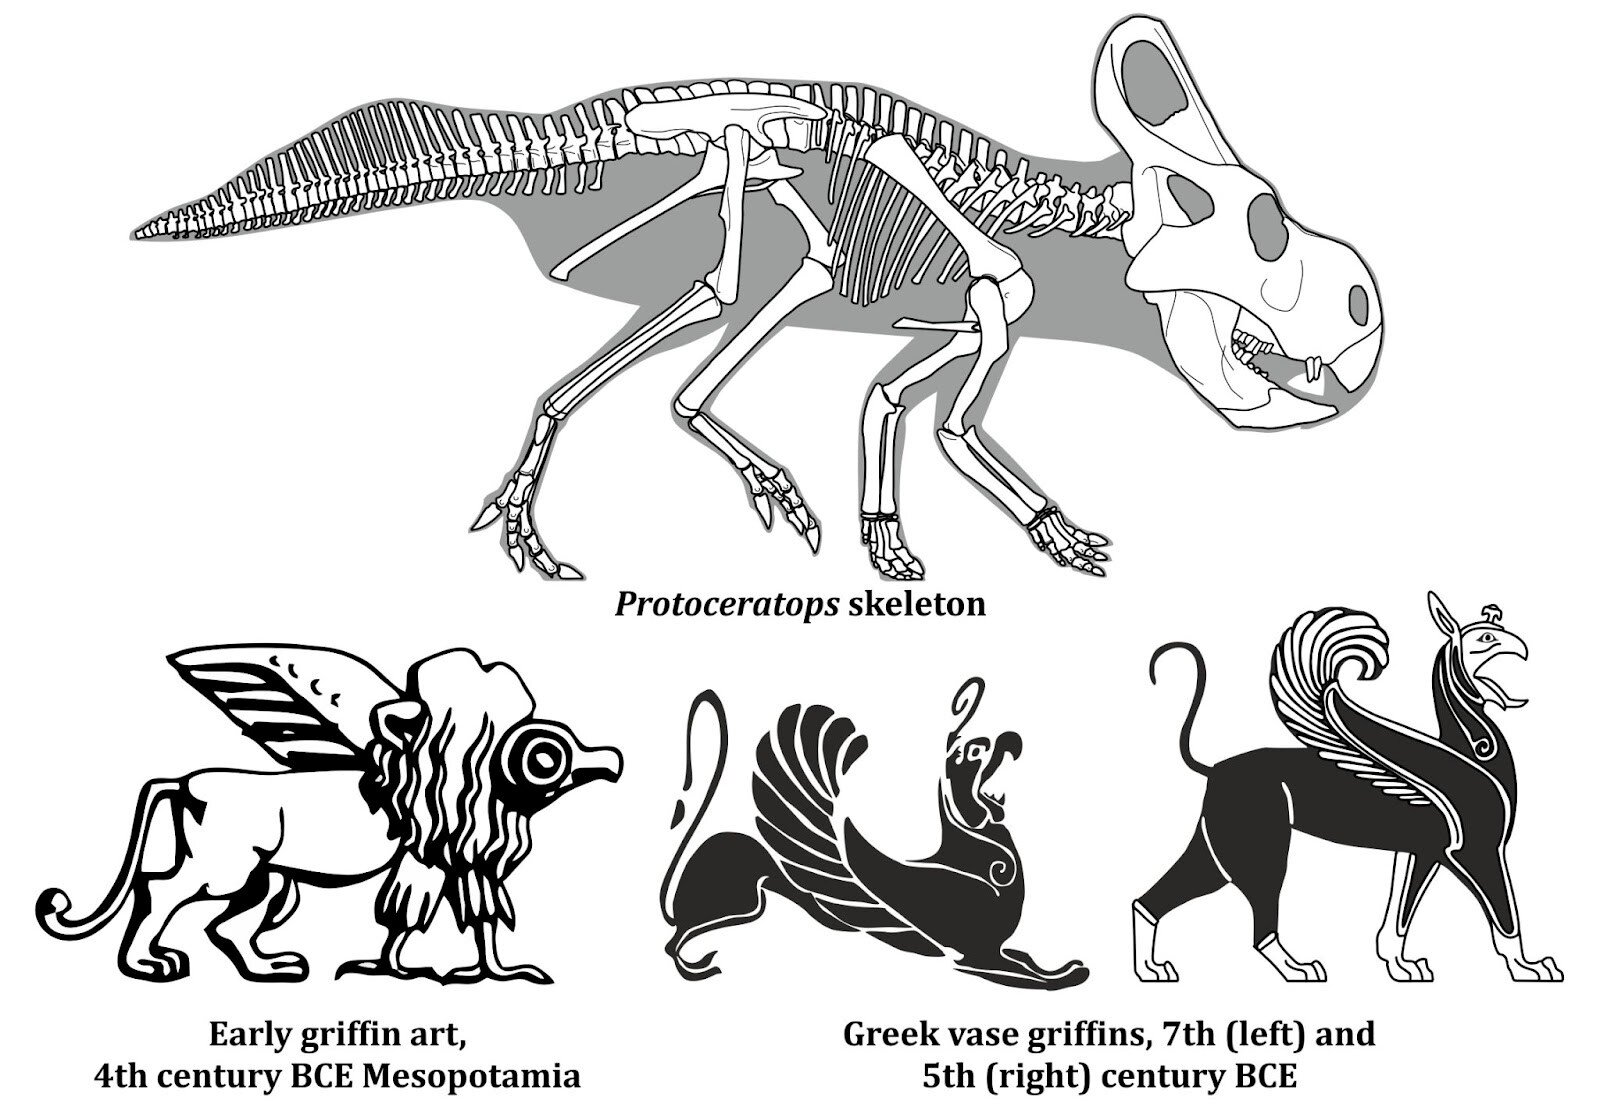 Dinosaur fossil compared to griffin depictions